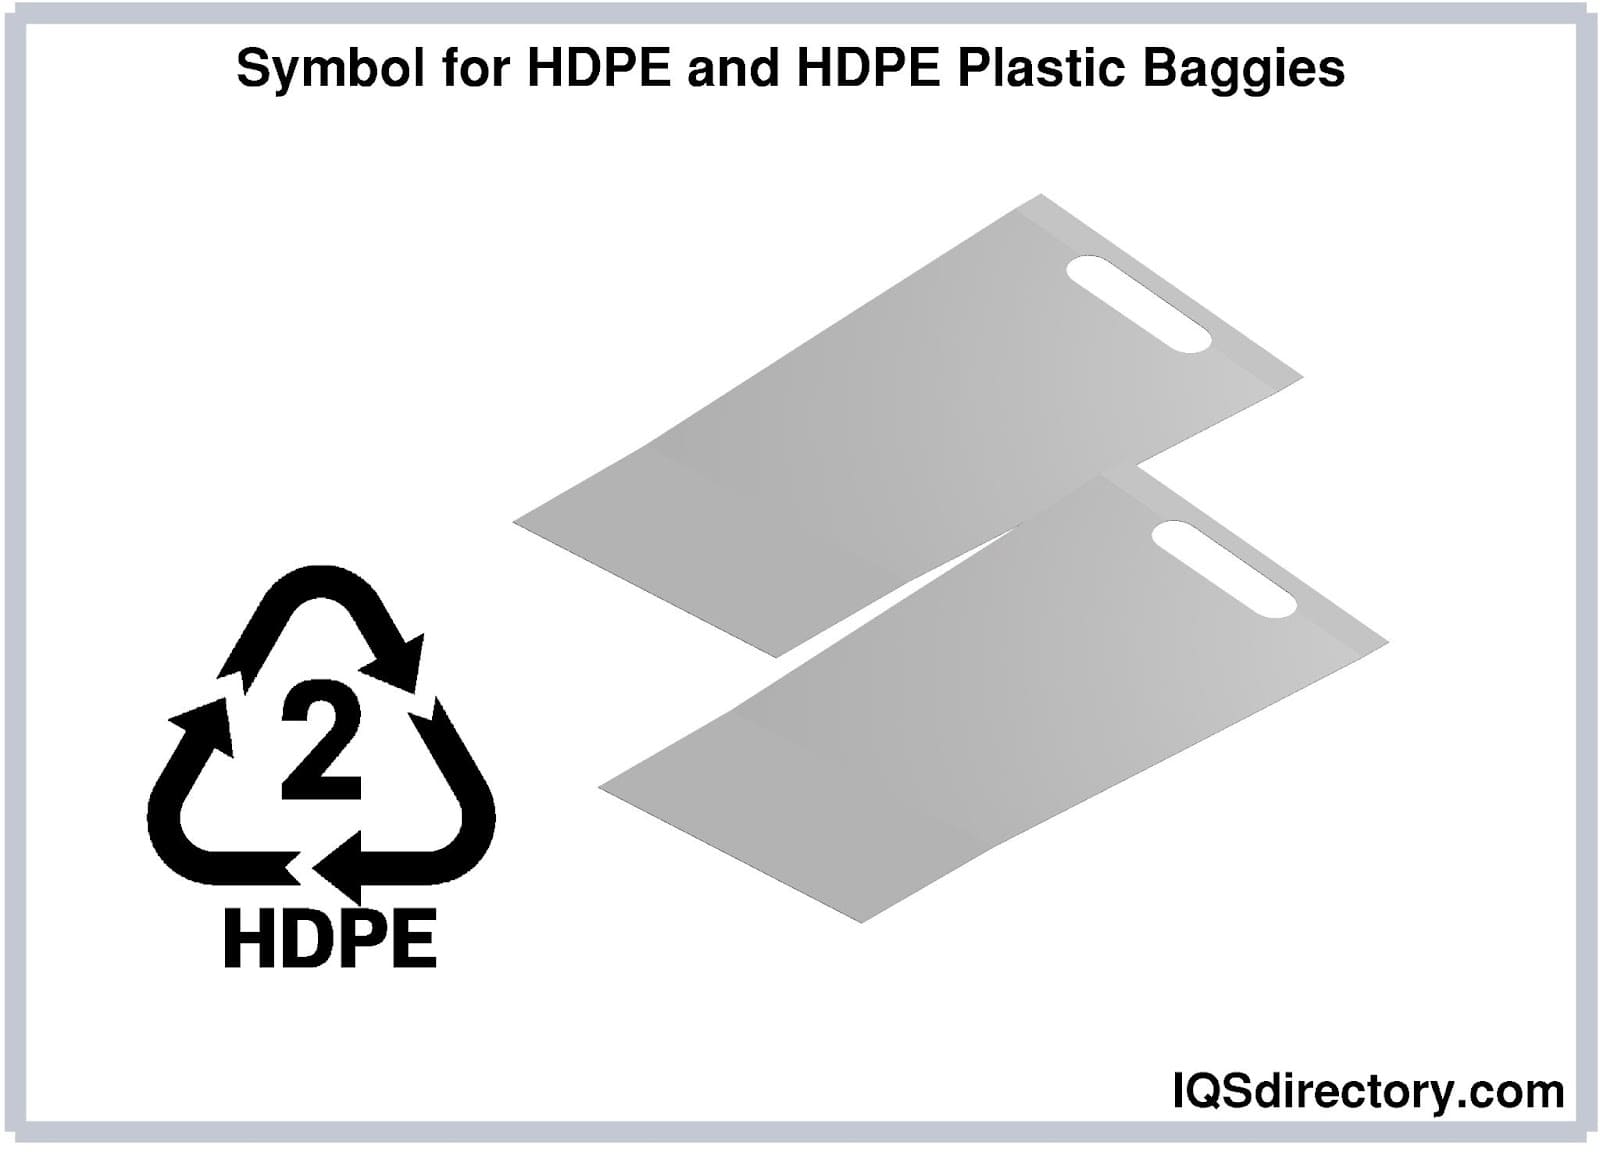 Plastic Baggies: Types, Applications, Features and Benefits